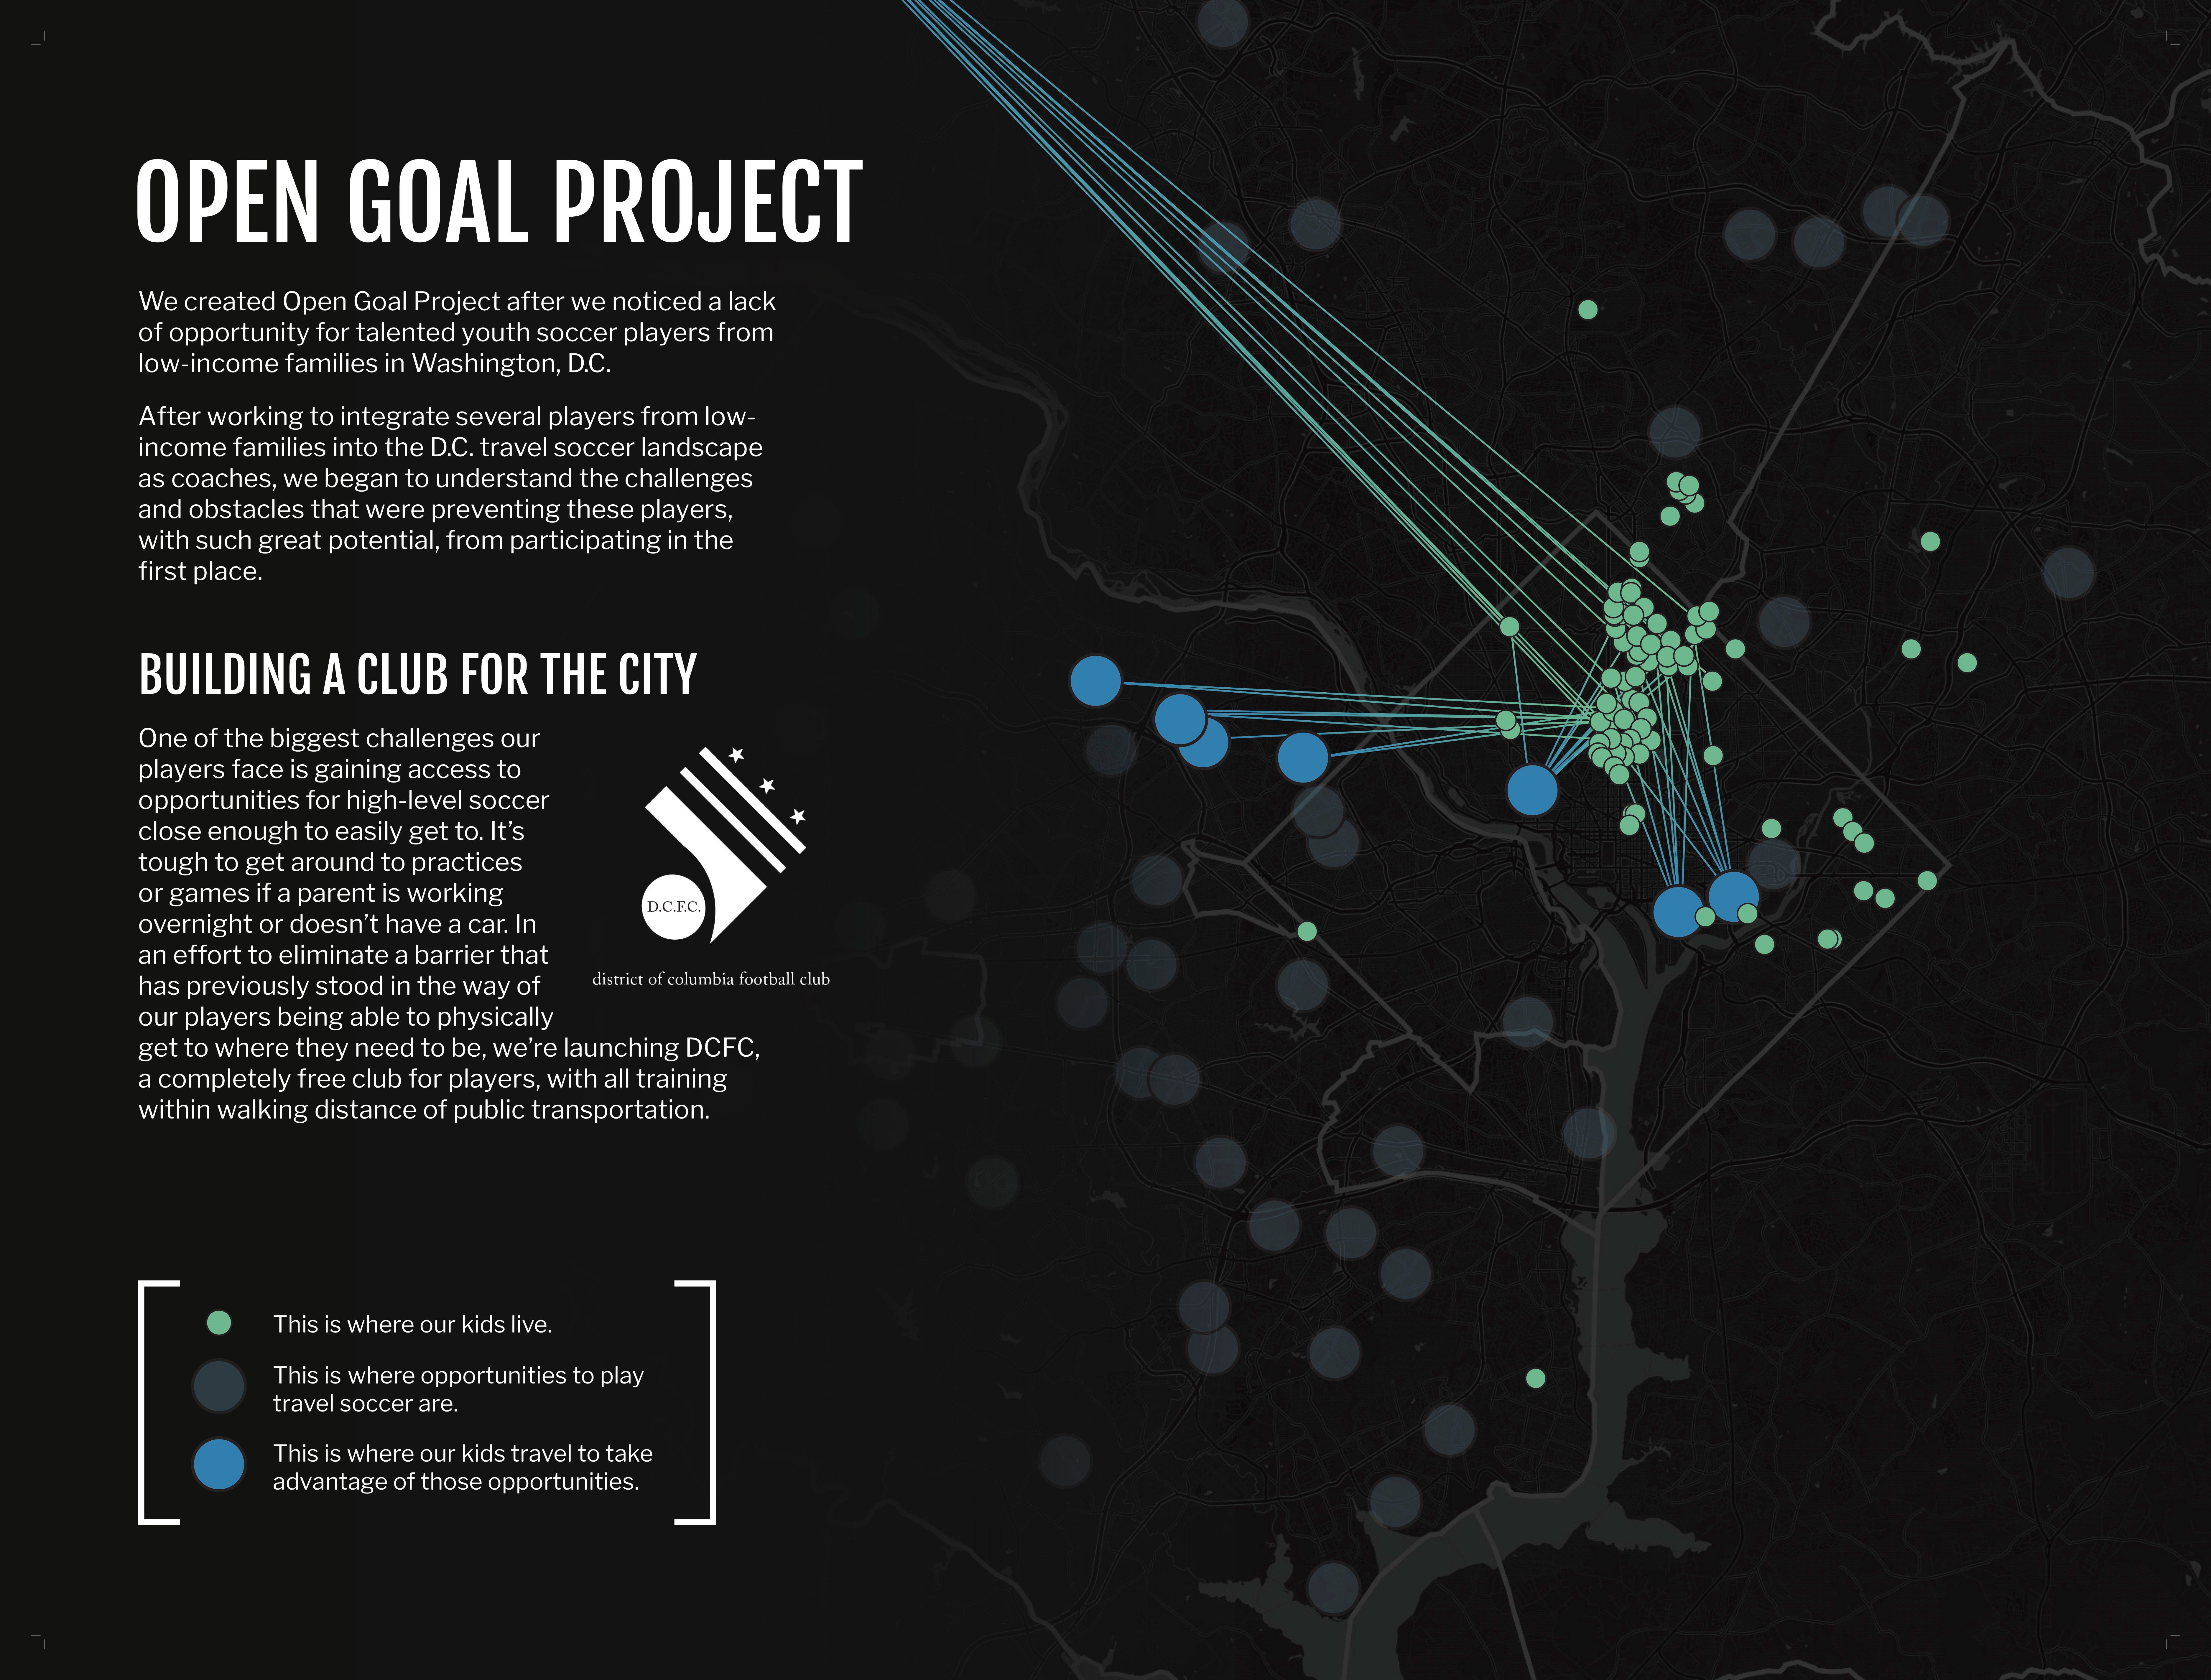 Open Goal Project map